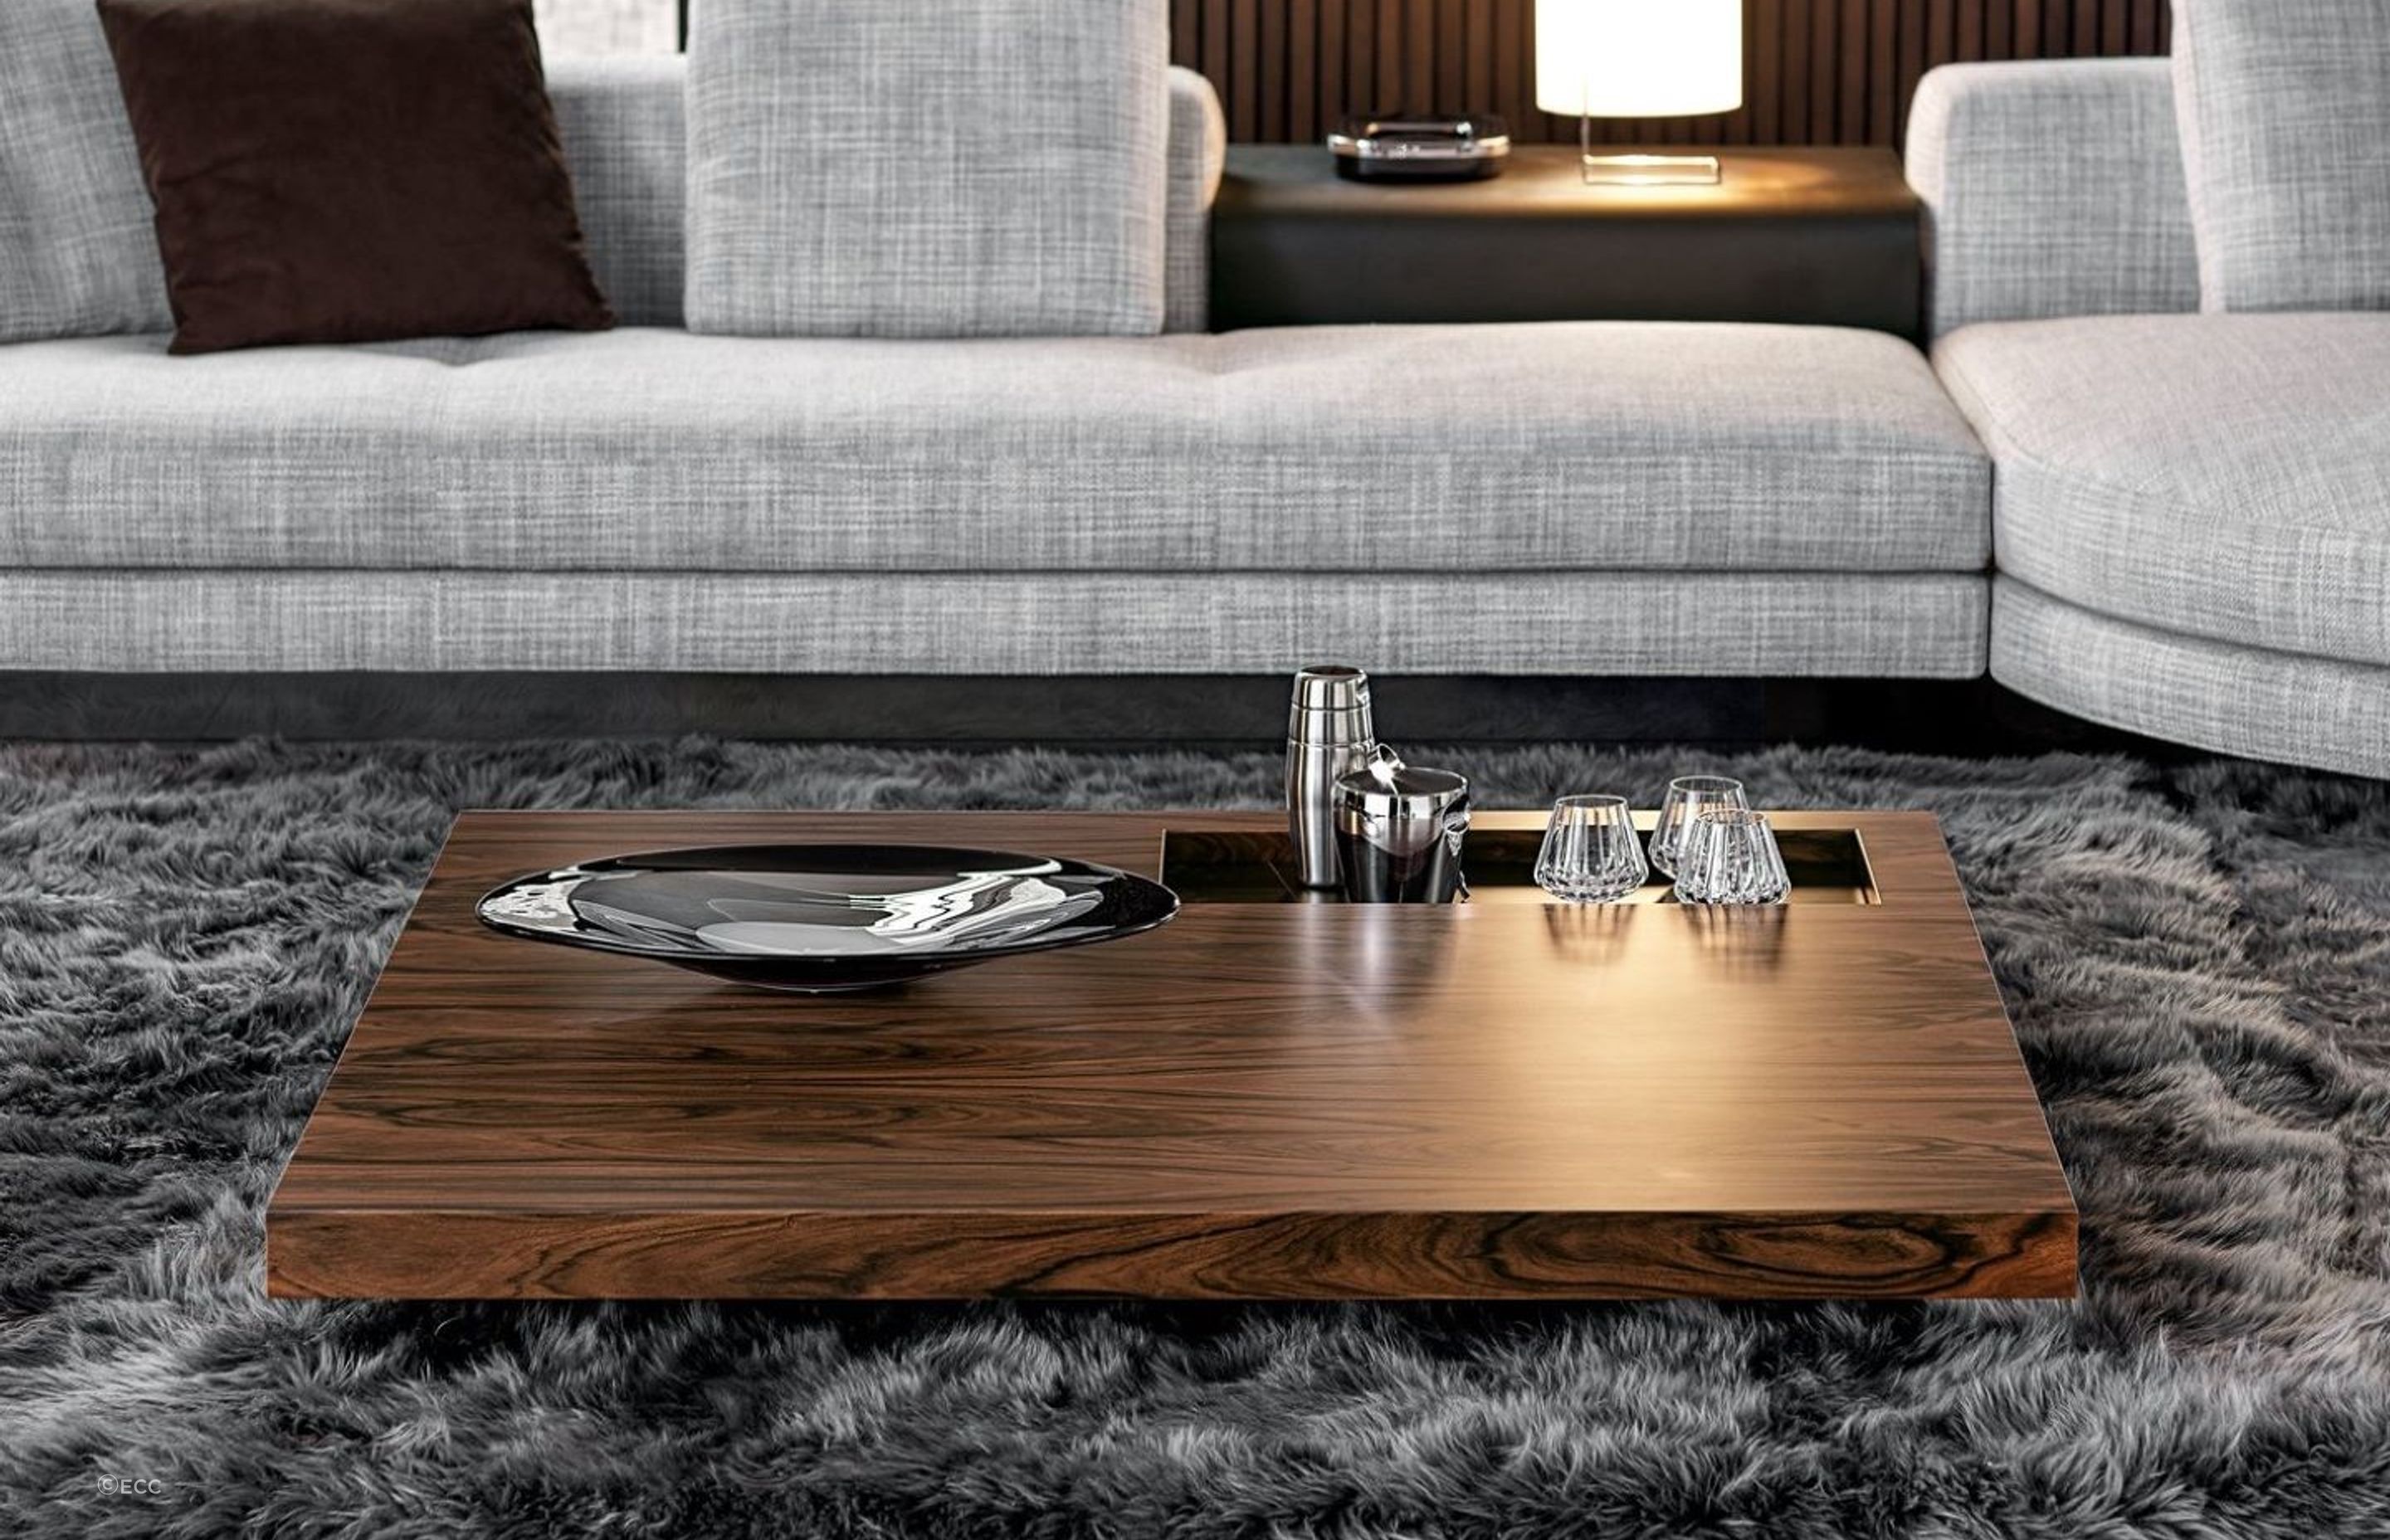 Glass and tableware can be permanent decor items for your coffee table, readily available when you need them, as seen here on the sophisticated Boteco Coffee Table by Minotti.